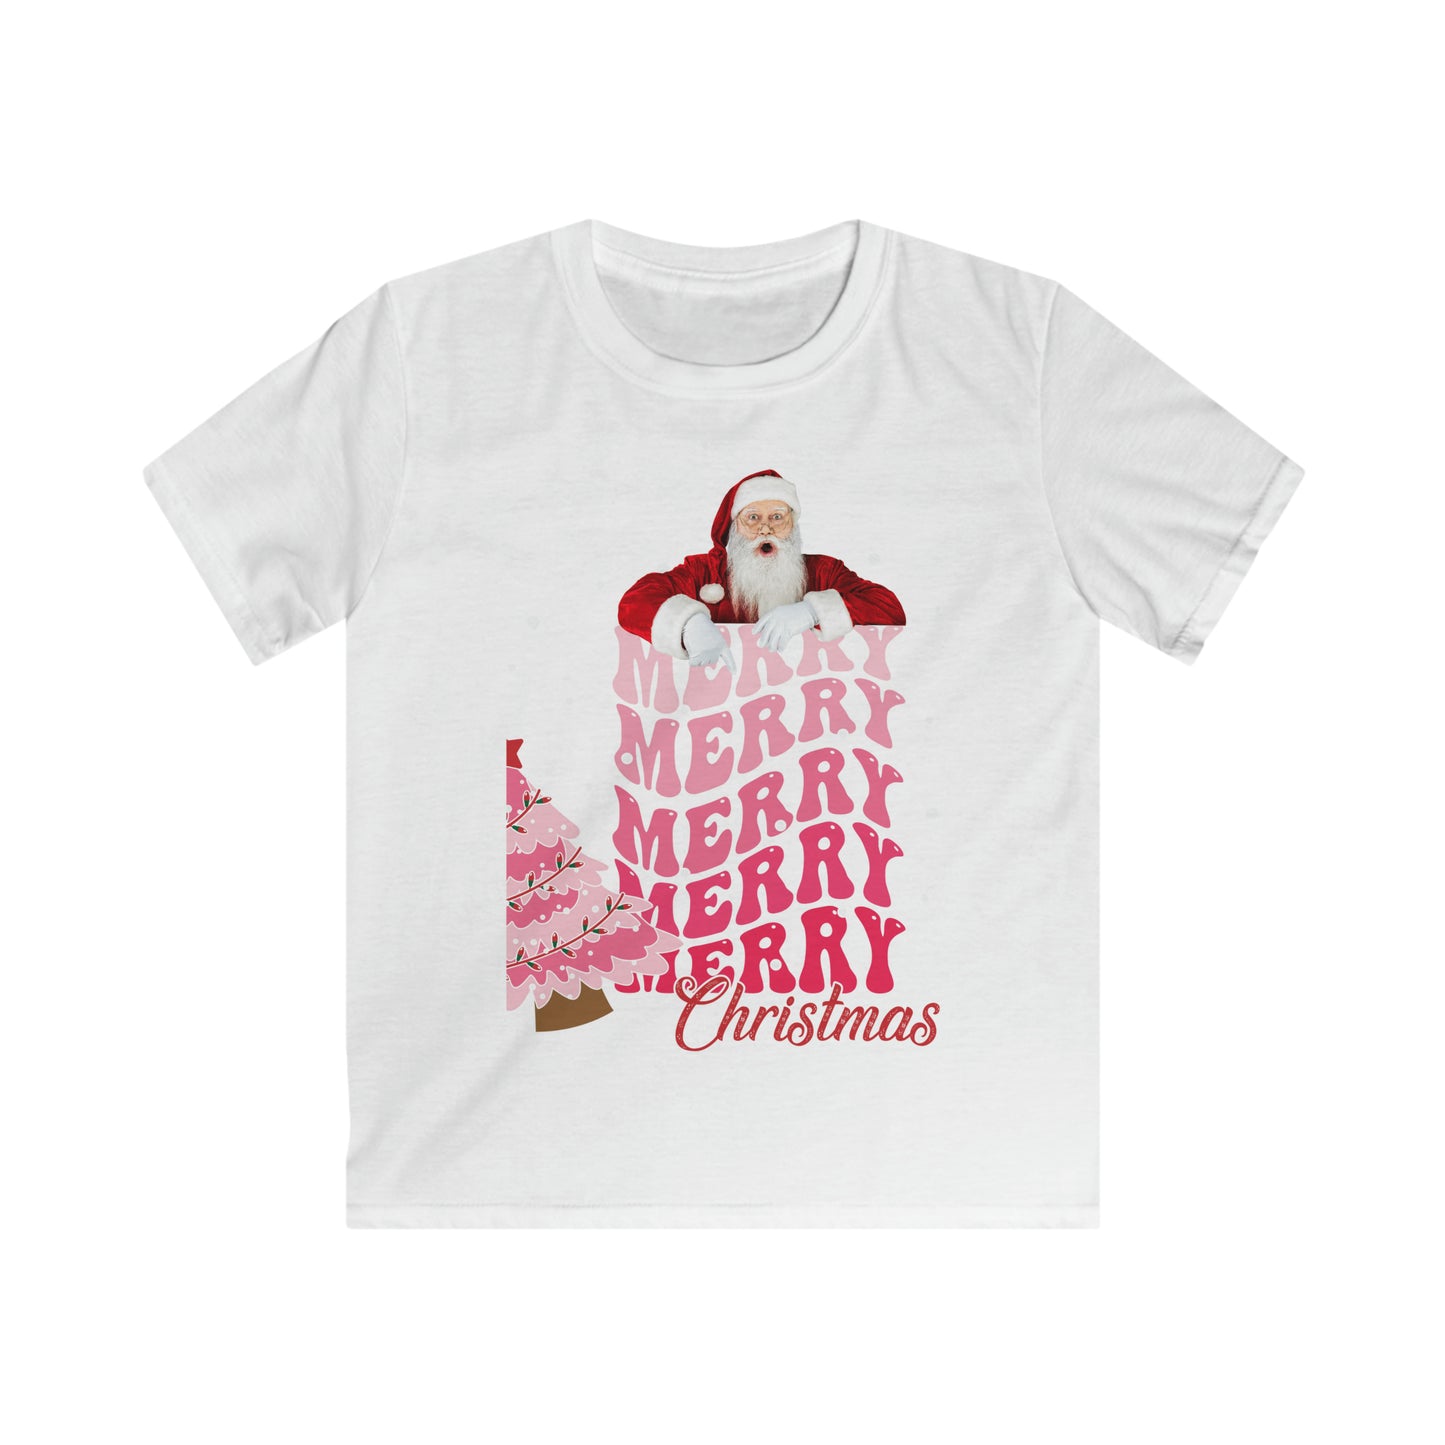 "Merry Merry Merry Christmas Kids Softstyle Tee - Festive Cheer, Holiday Joy, Trending Apparel for Little Ones"